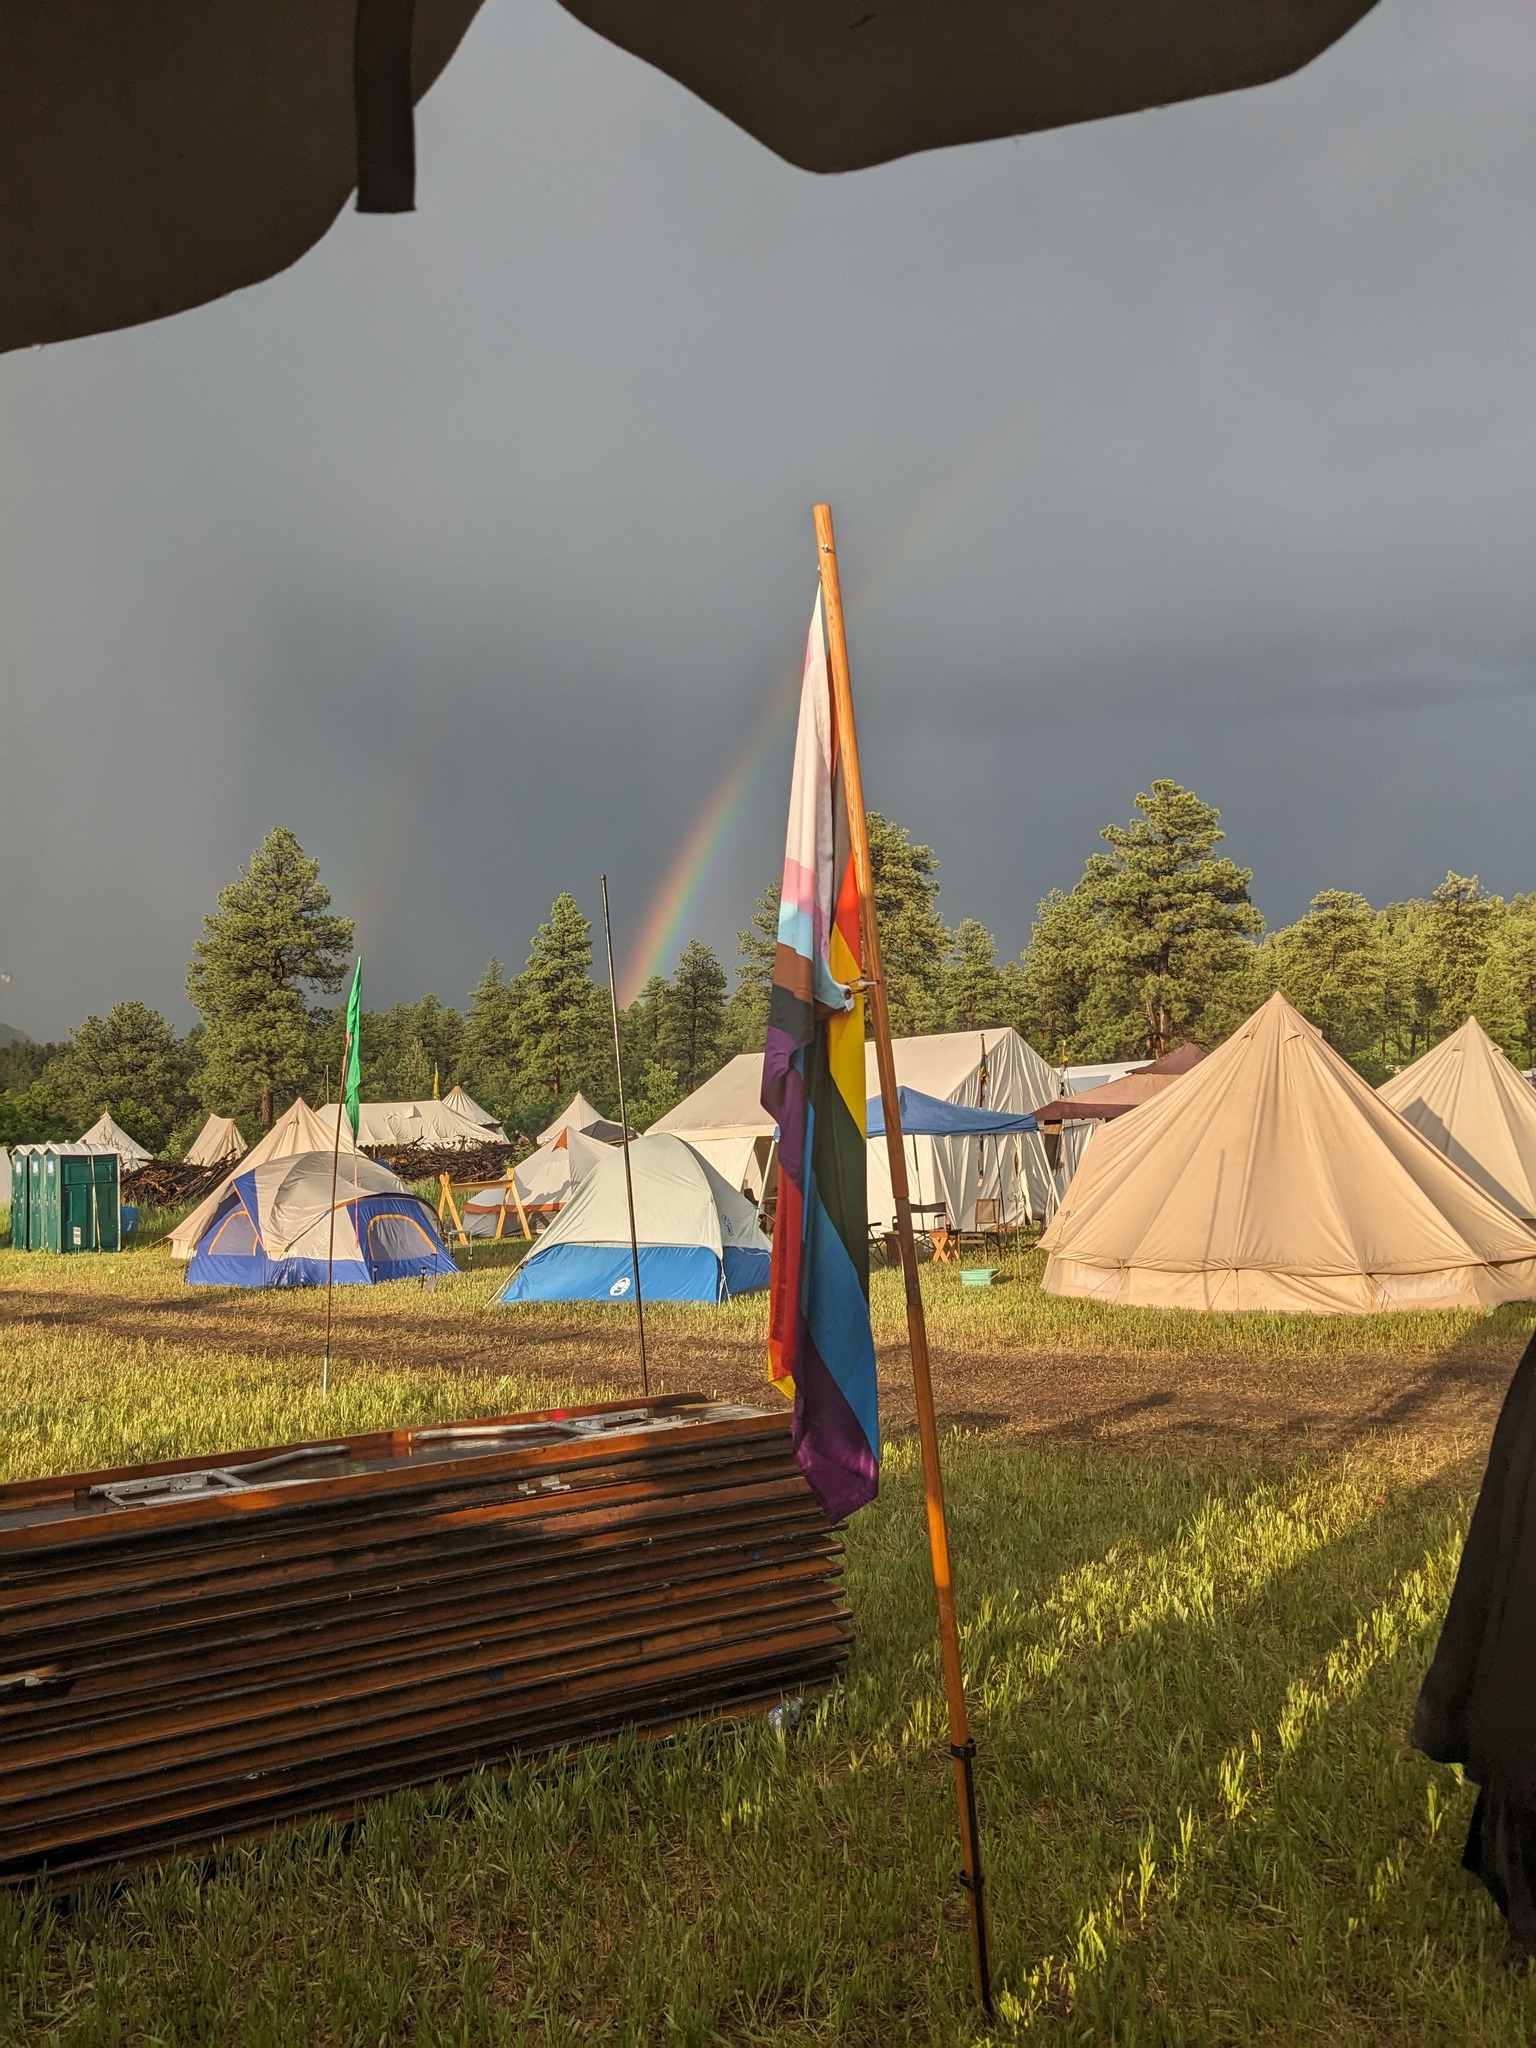 Picture of a pride flag in front of tents. There are clouds in the sky and a rainbow.